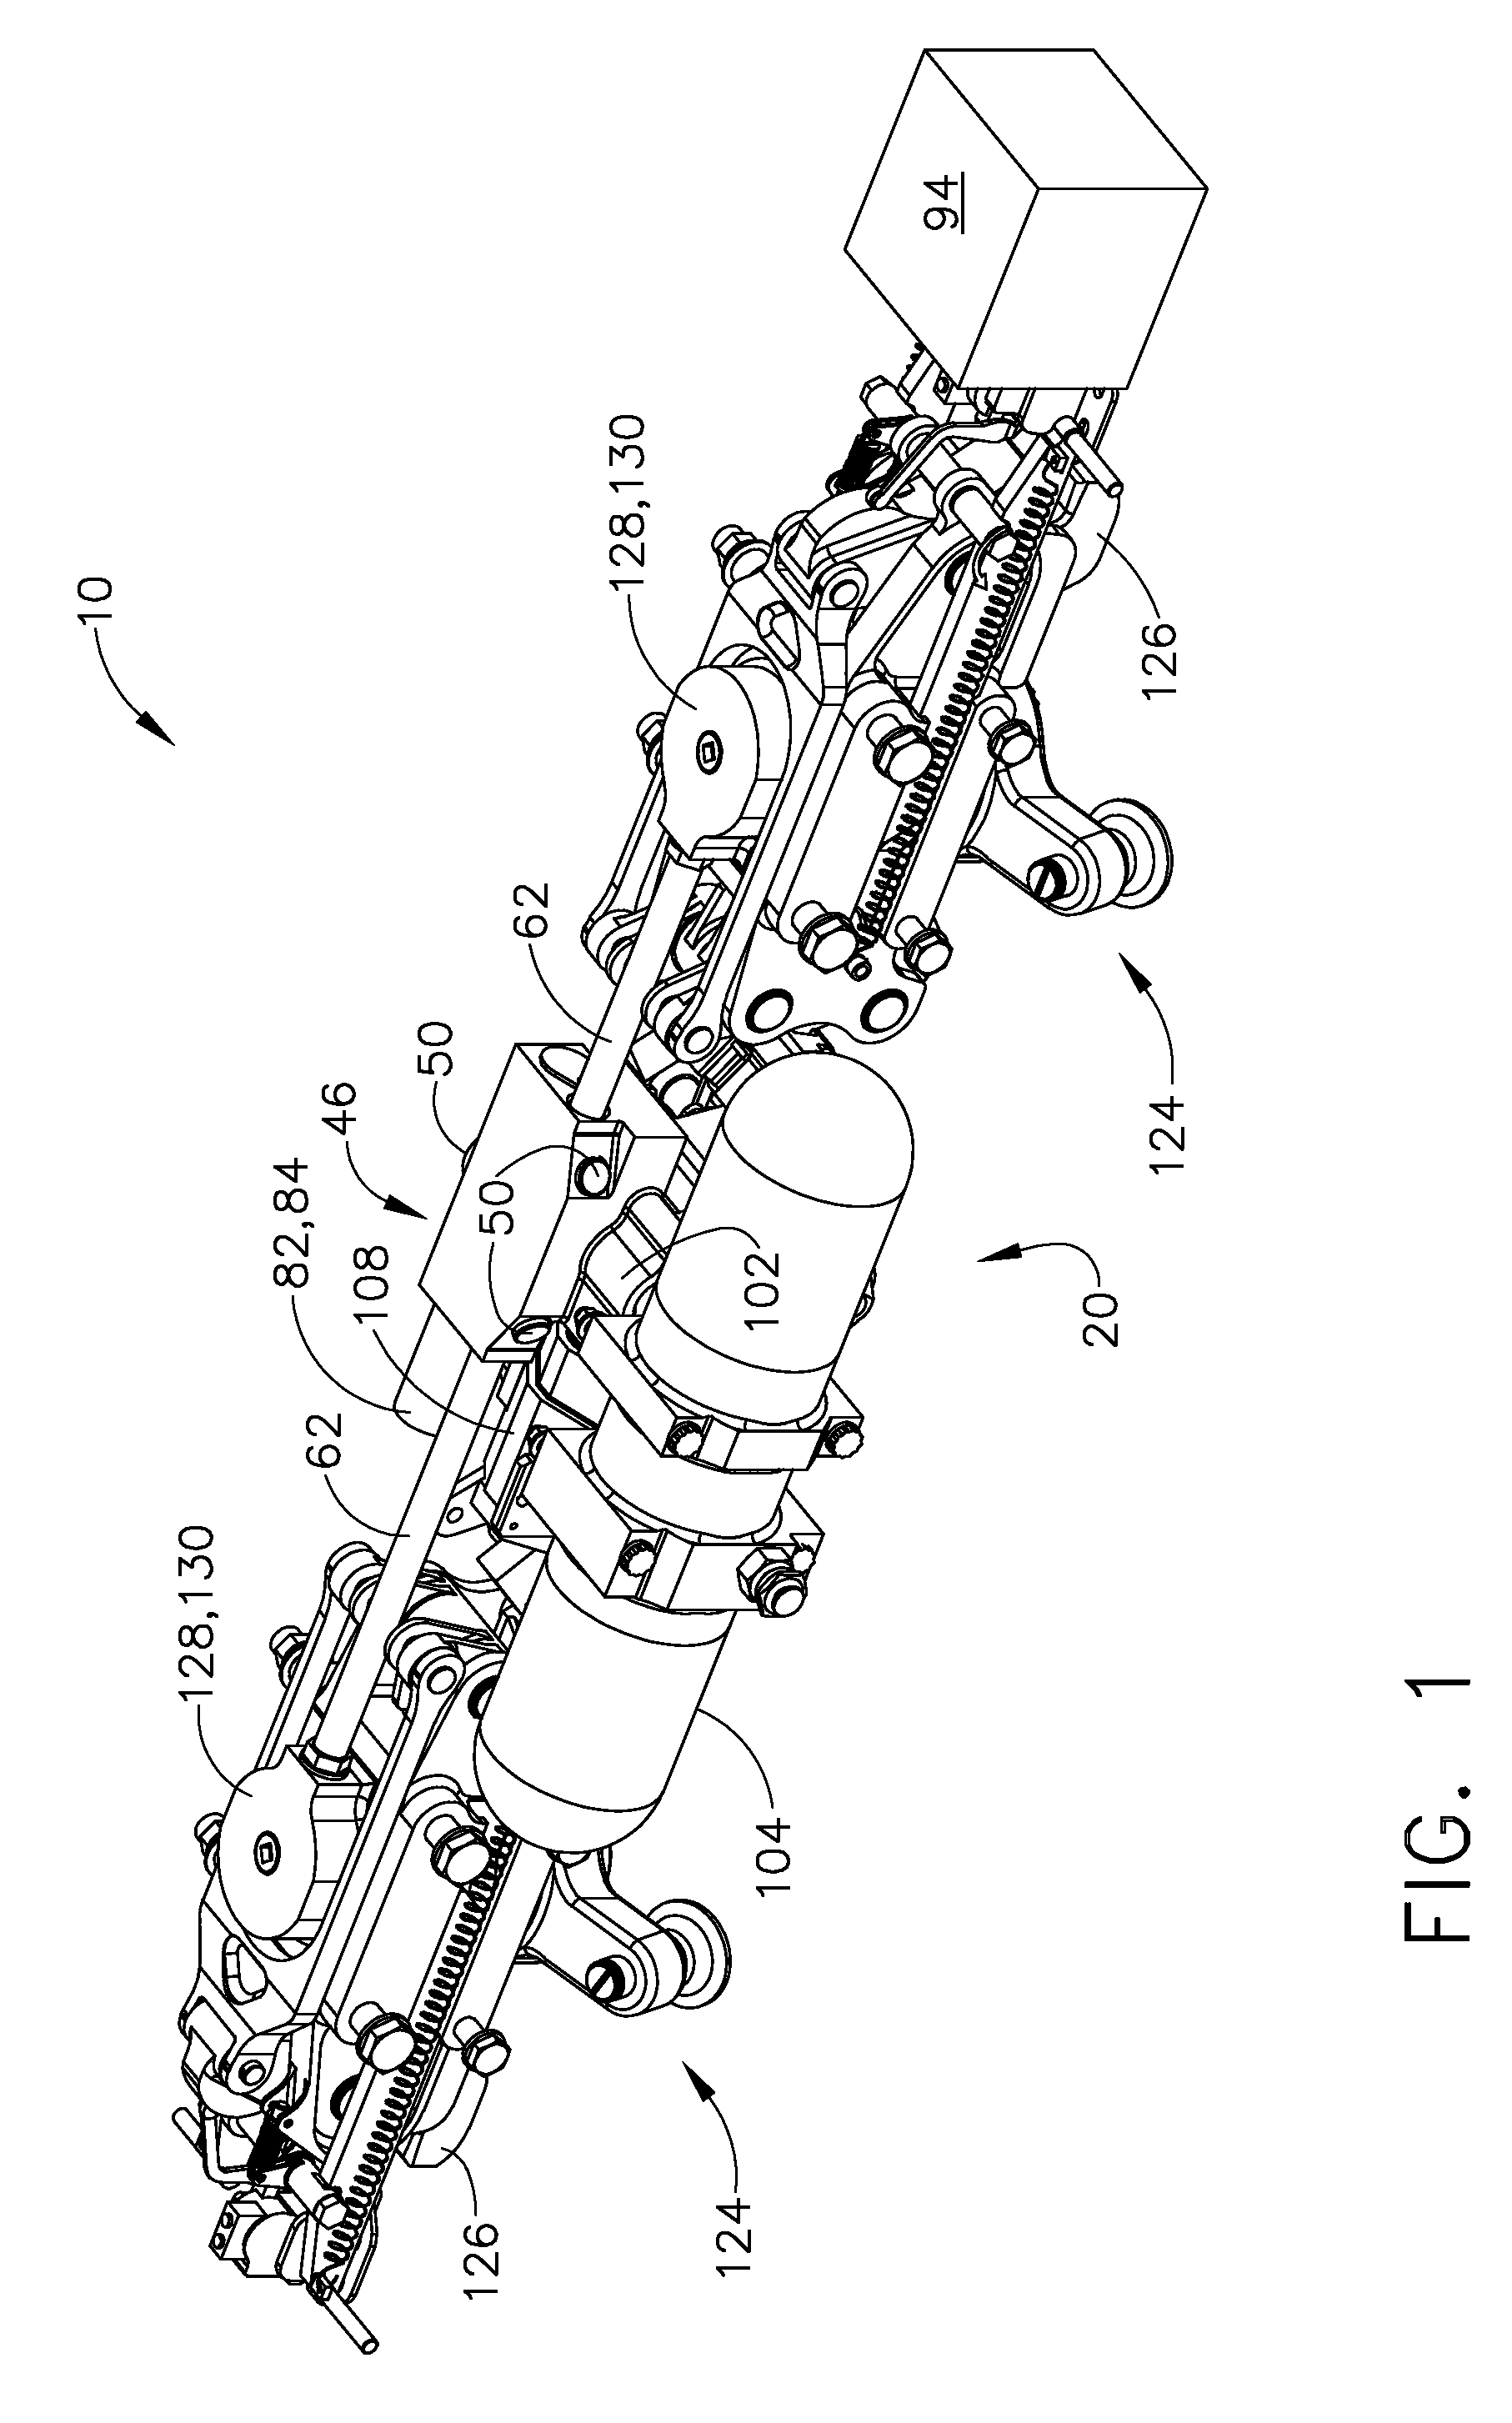 System and method for in-flight adjustment of store ejector gas flow orificing